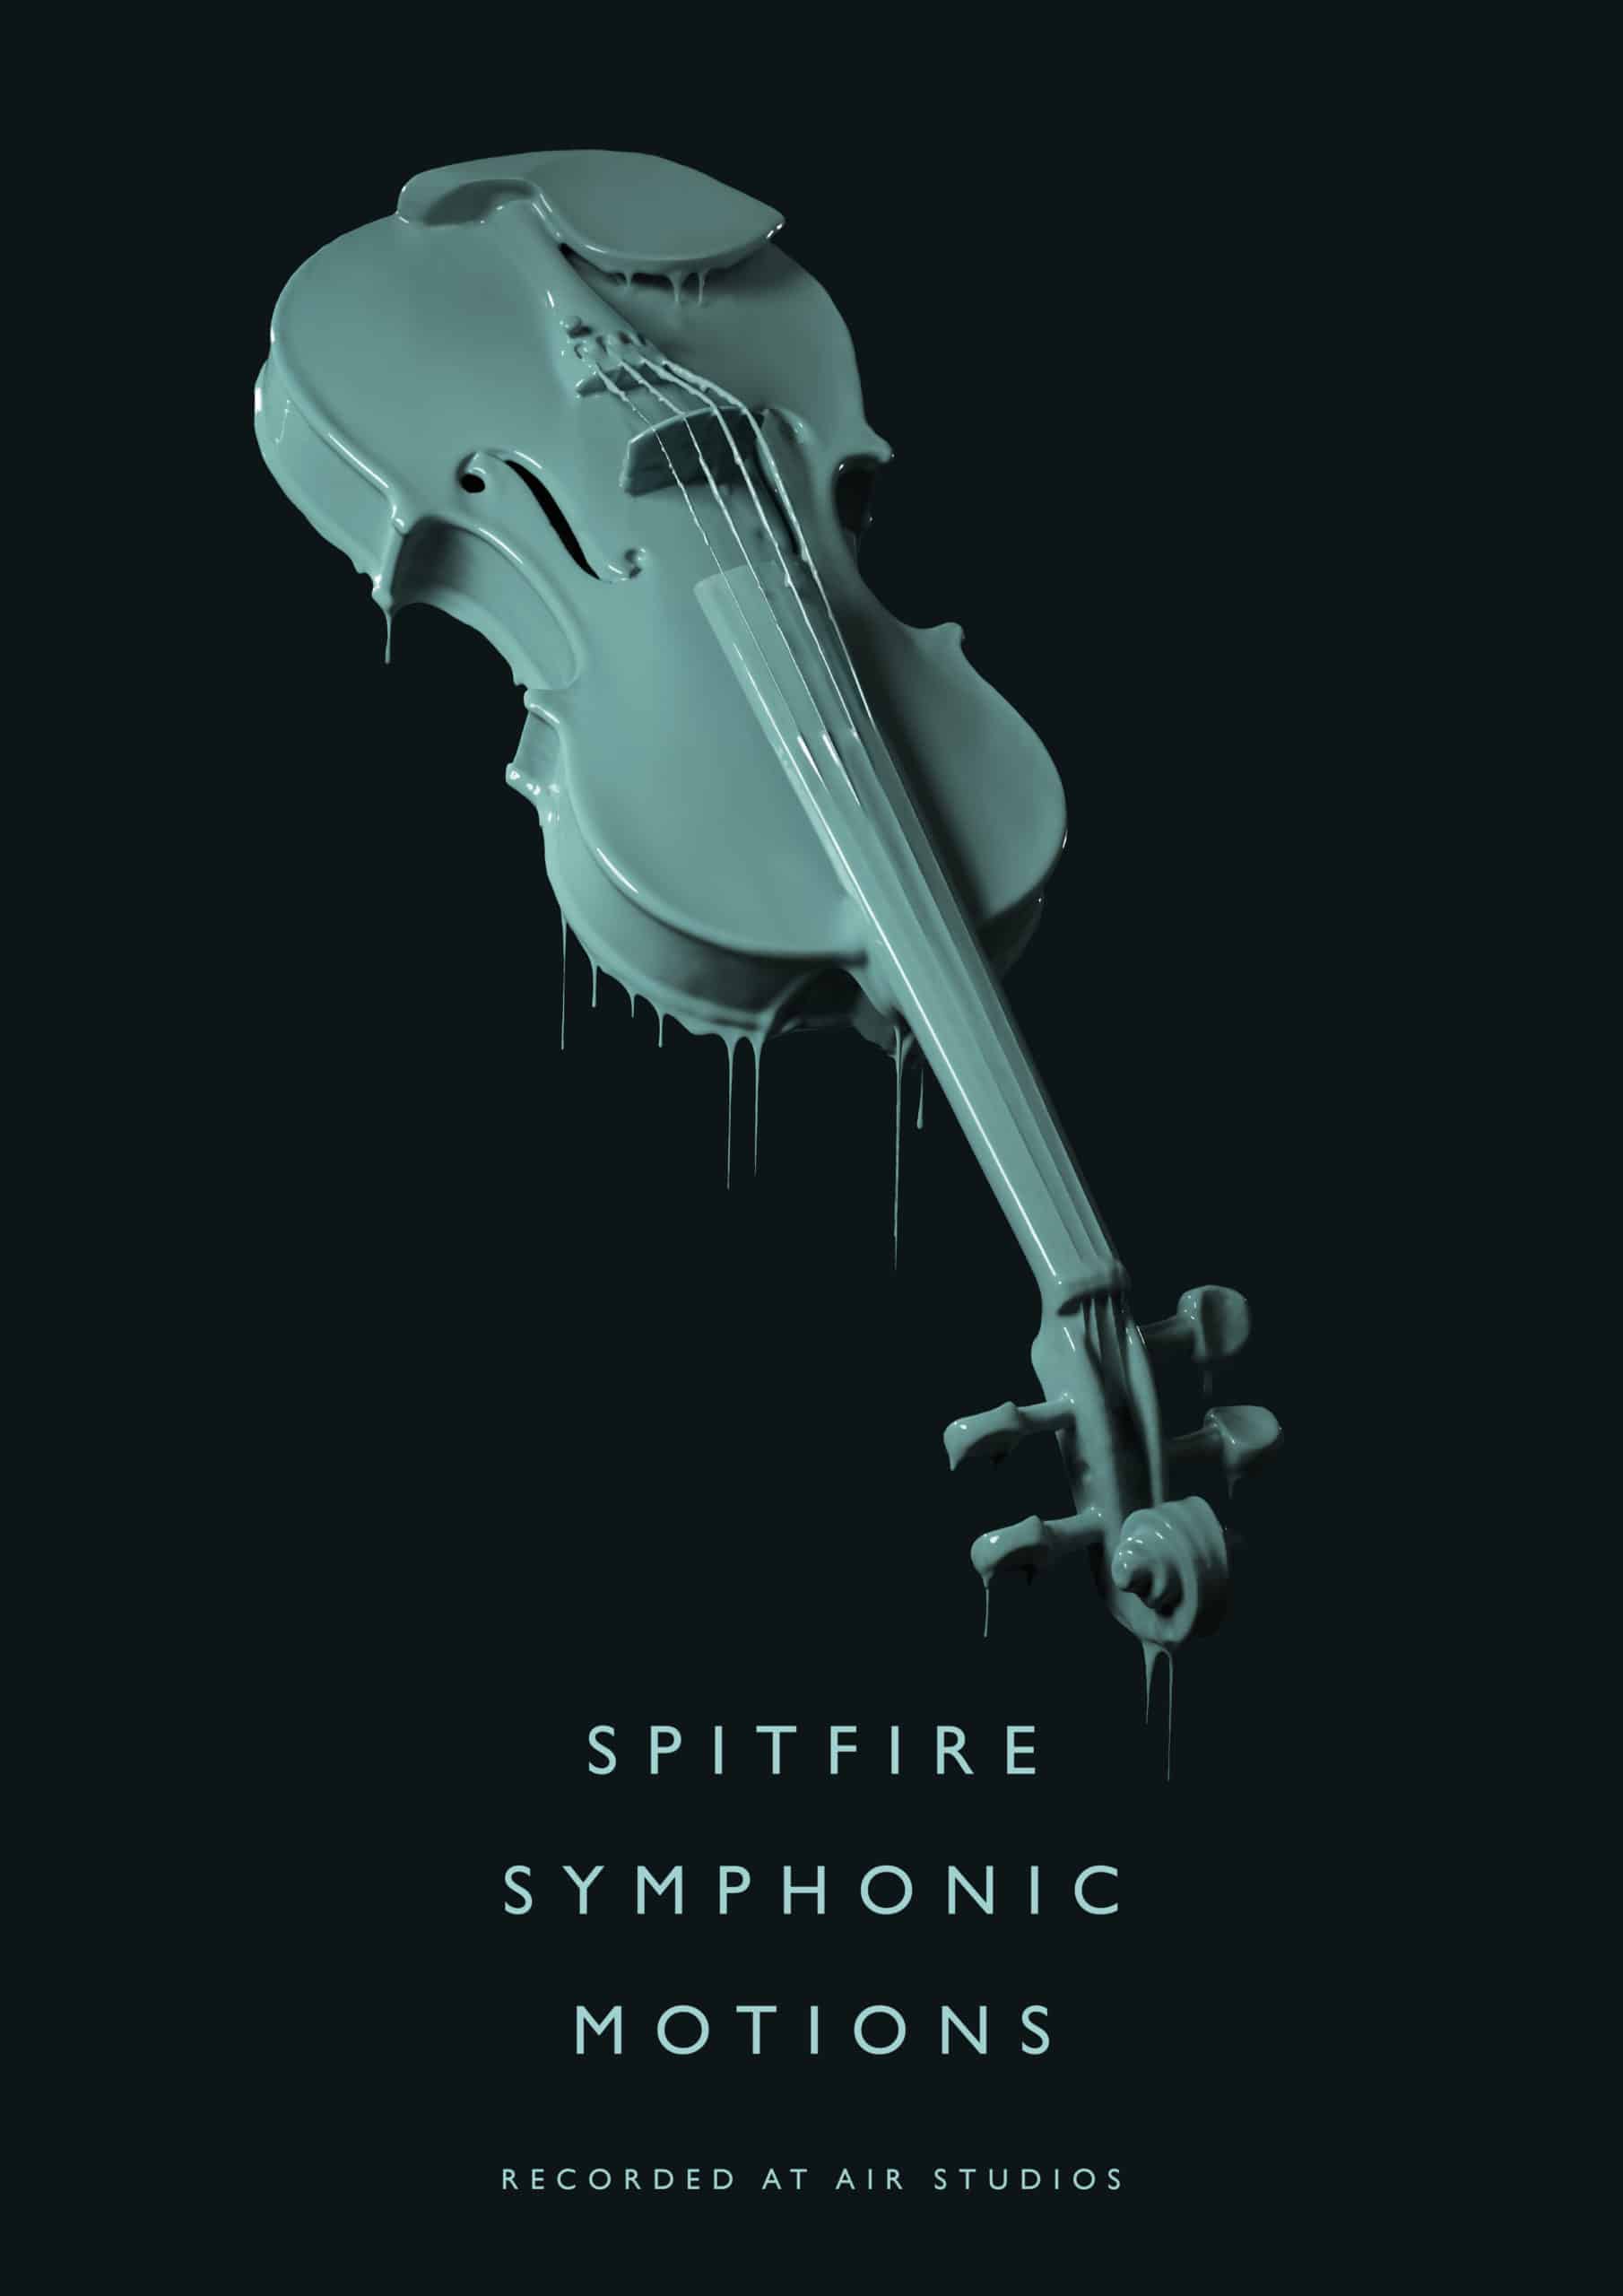 Spitfire Symphonic Motions Released